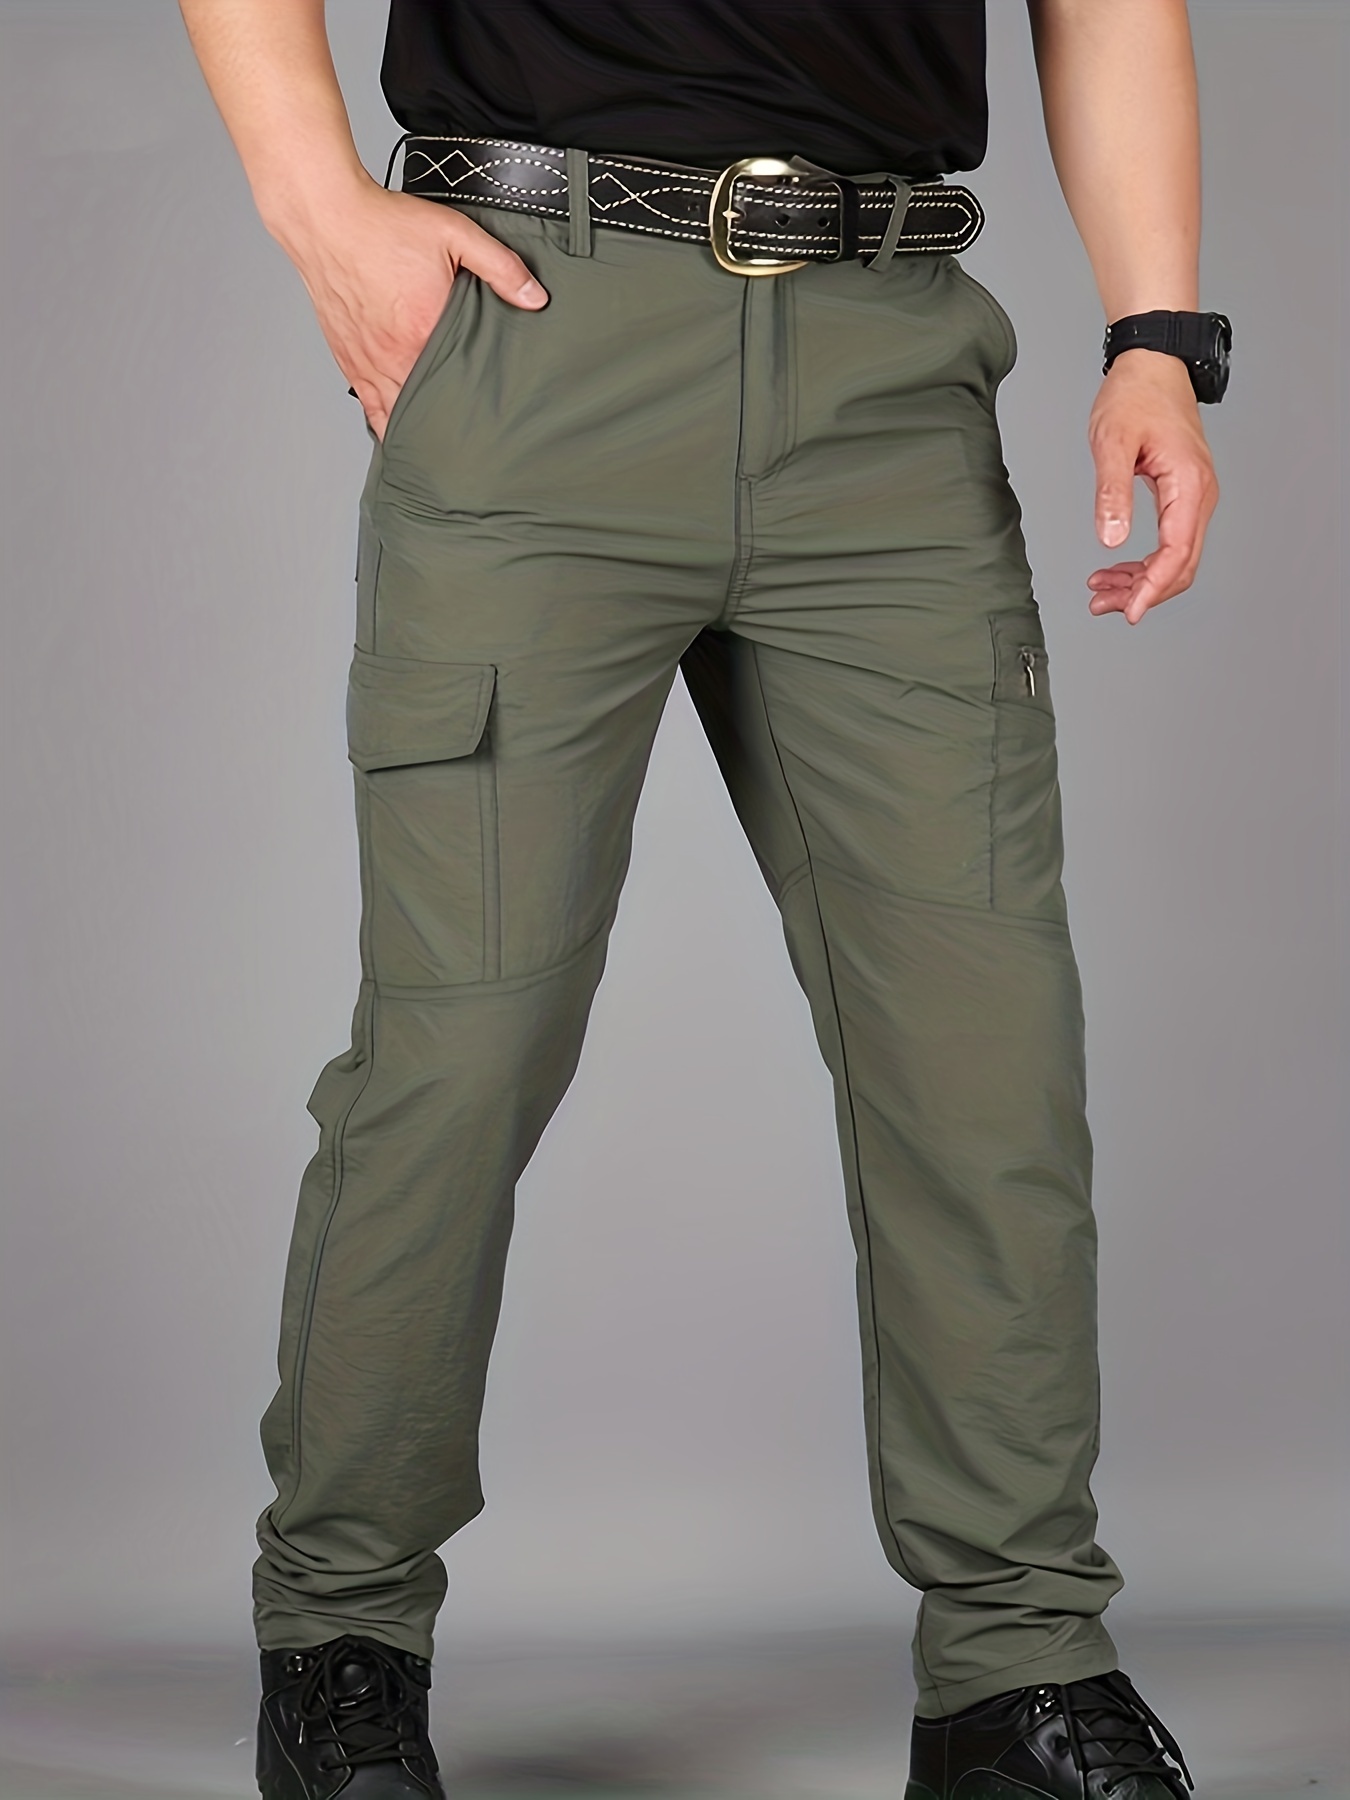 Temu Pocket Solid Casual Pants, Trousers, Men's Non-Stretch Sports Outdoor Summer Quick Thin Breathable Work Mountaineering Waterproof Large Fit Pants